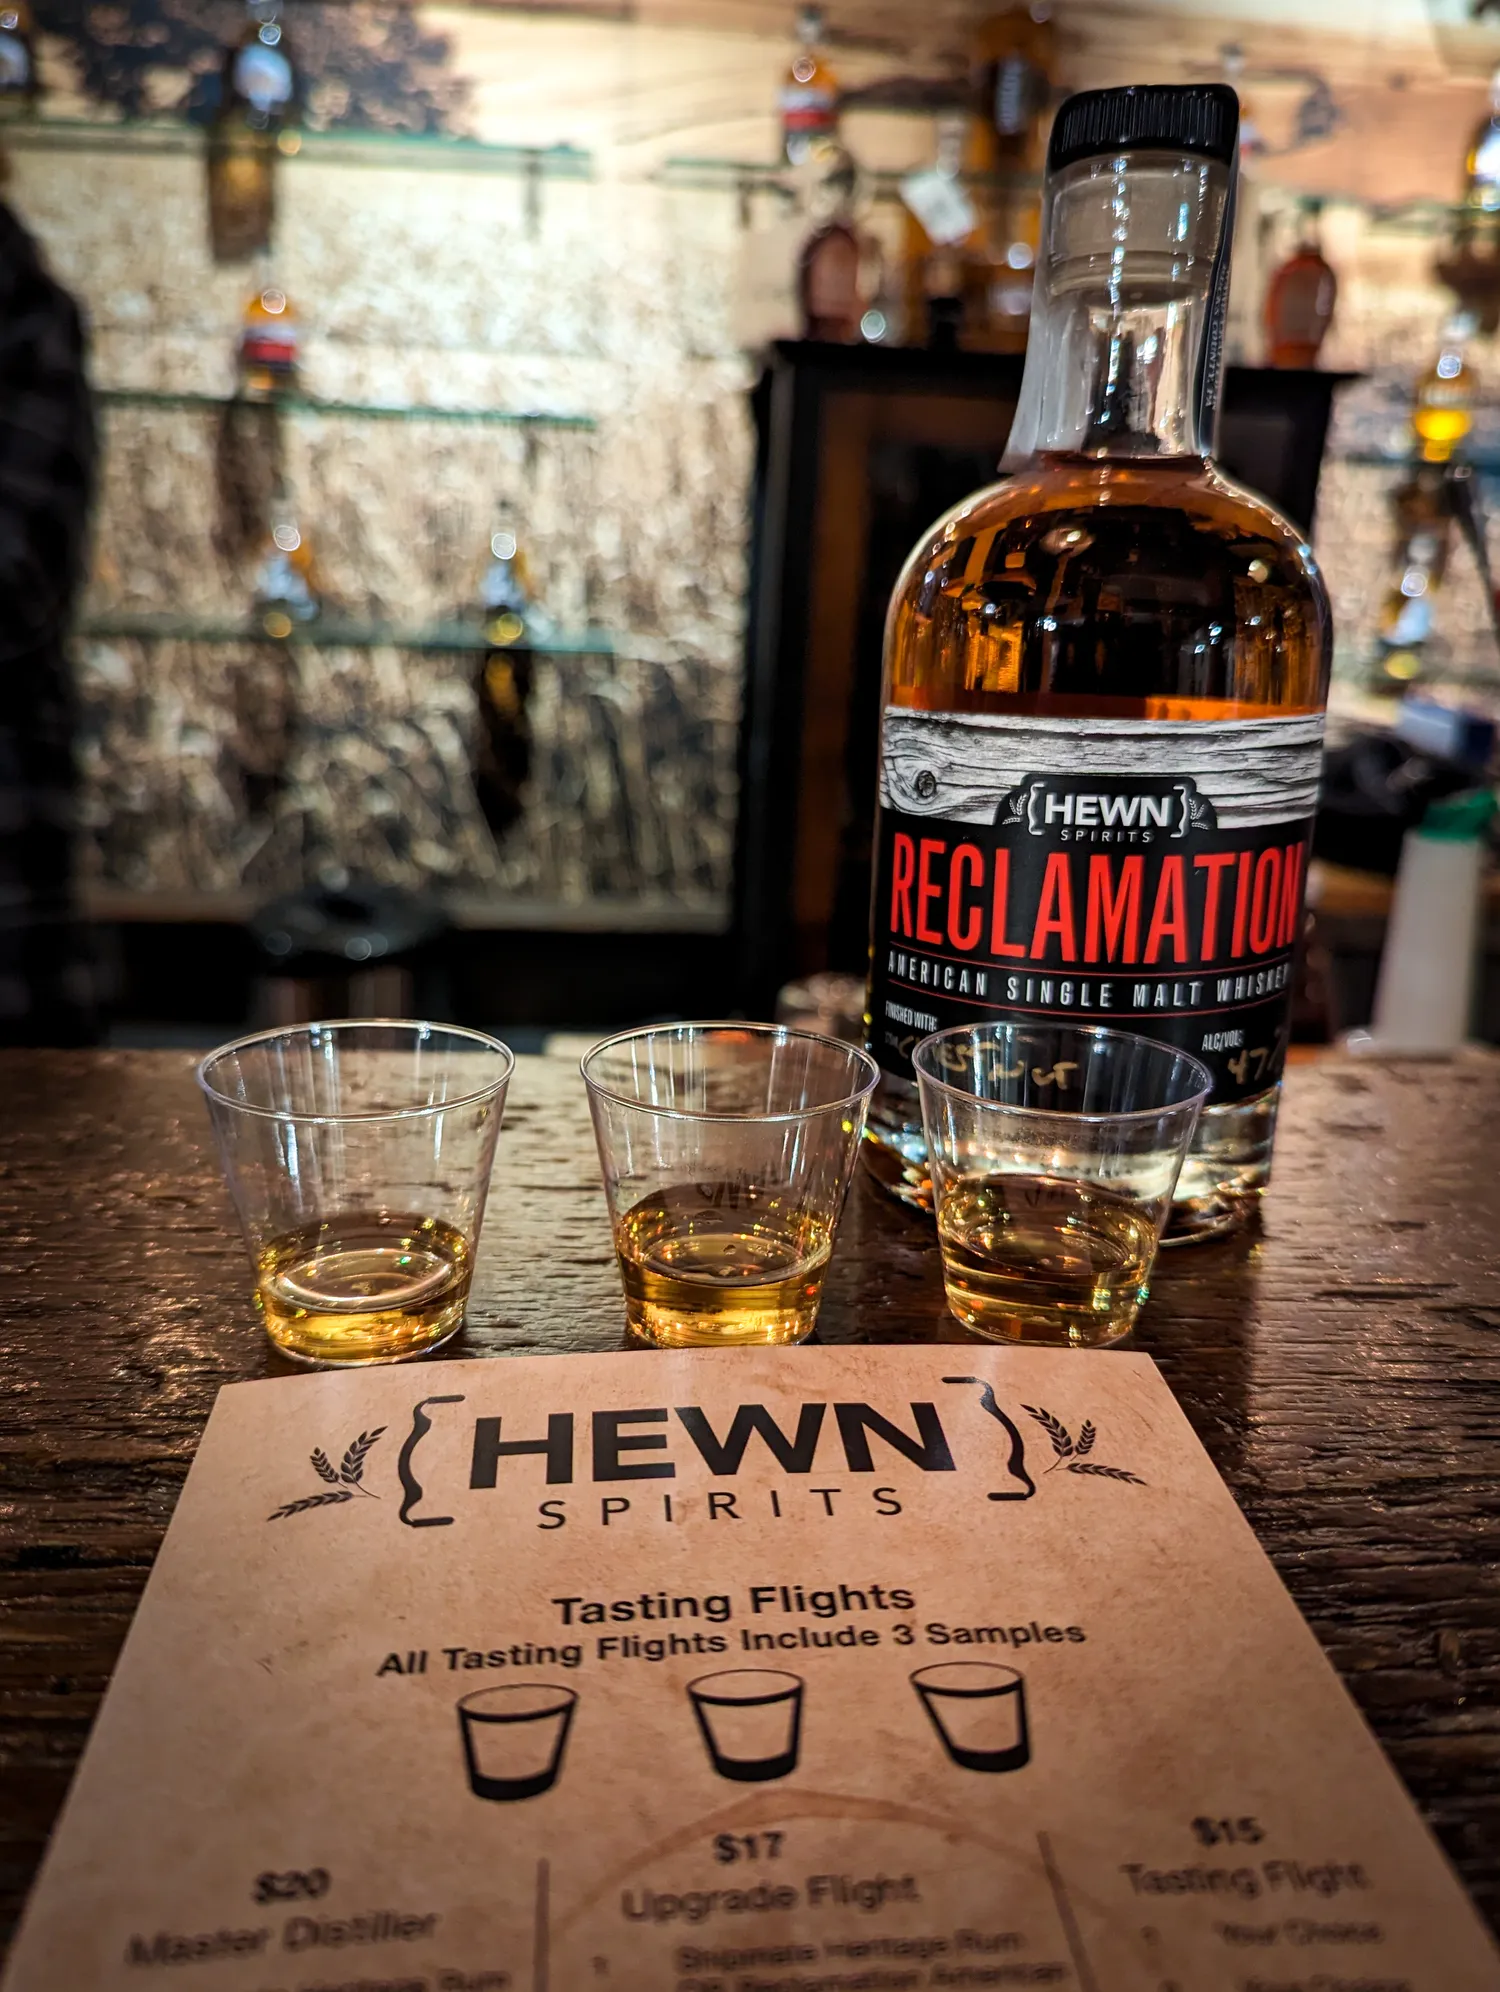 A bottle of Hewn Reclamation whiskey and 3 shots glasses lined up for a tasting.